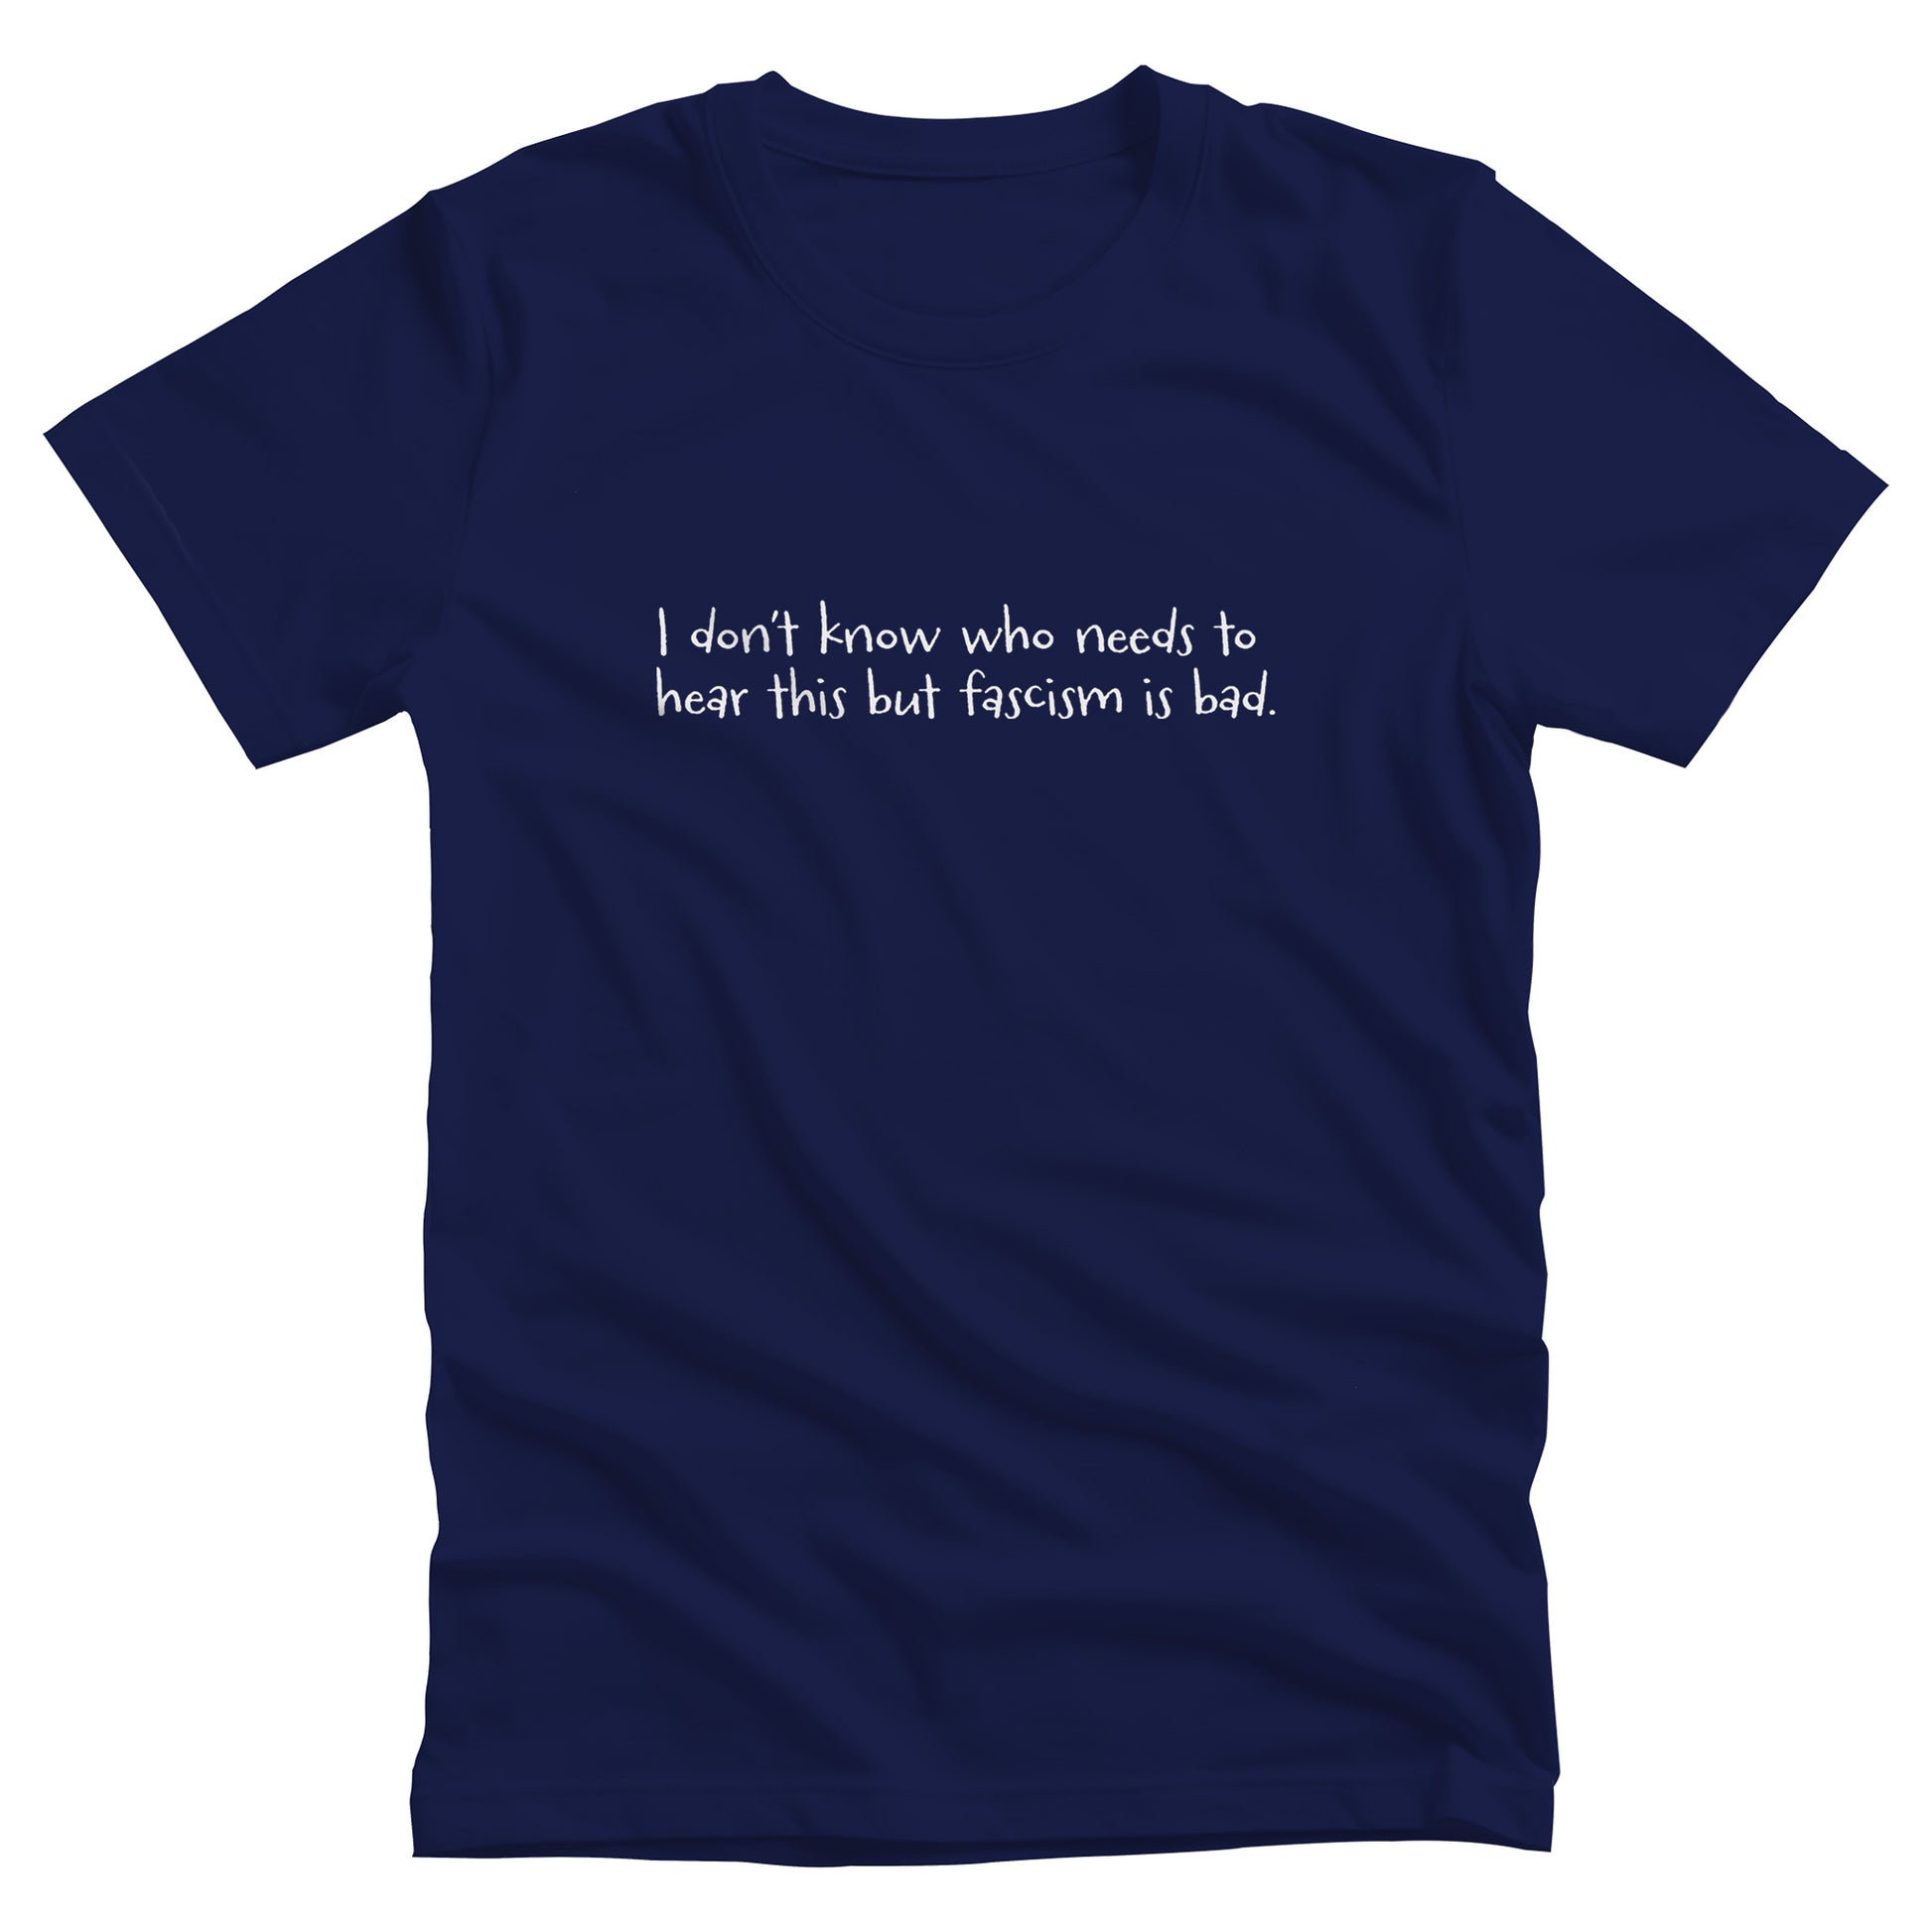 Navy Blue unisex t-shirt that reads in a hand-written font, “I don’t know who needs to hear this but fascism is bad.” It takes up two lines.